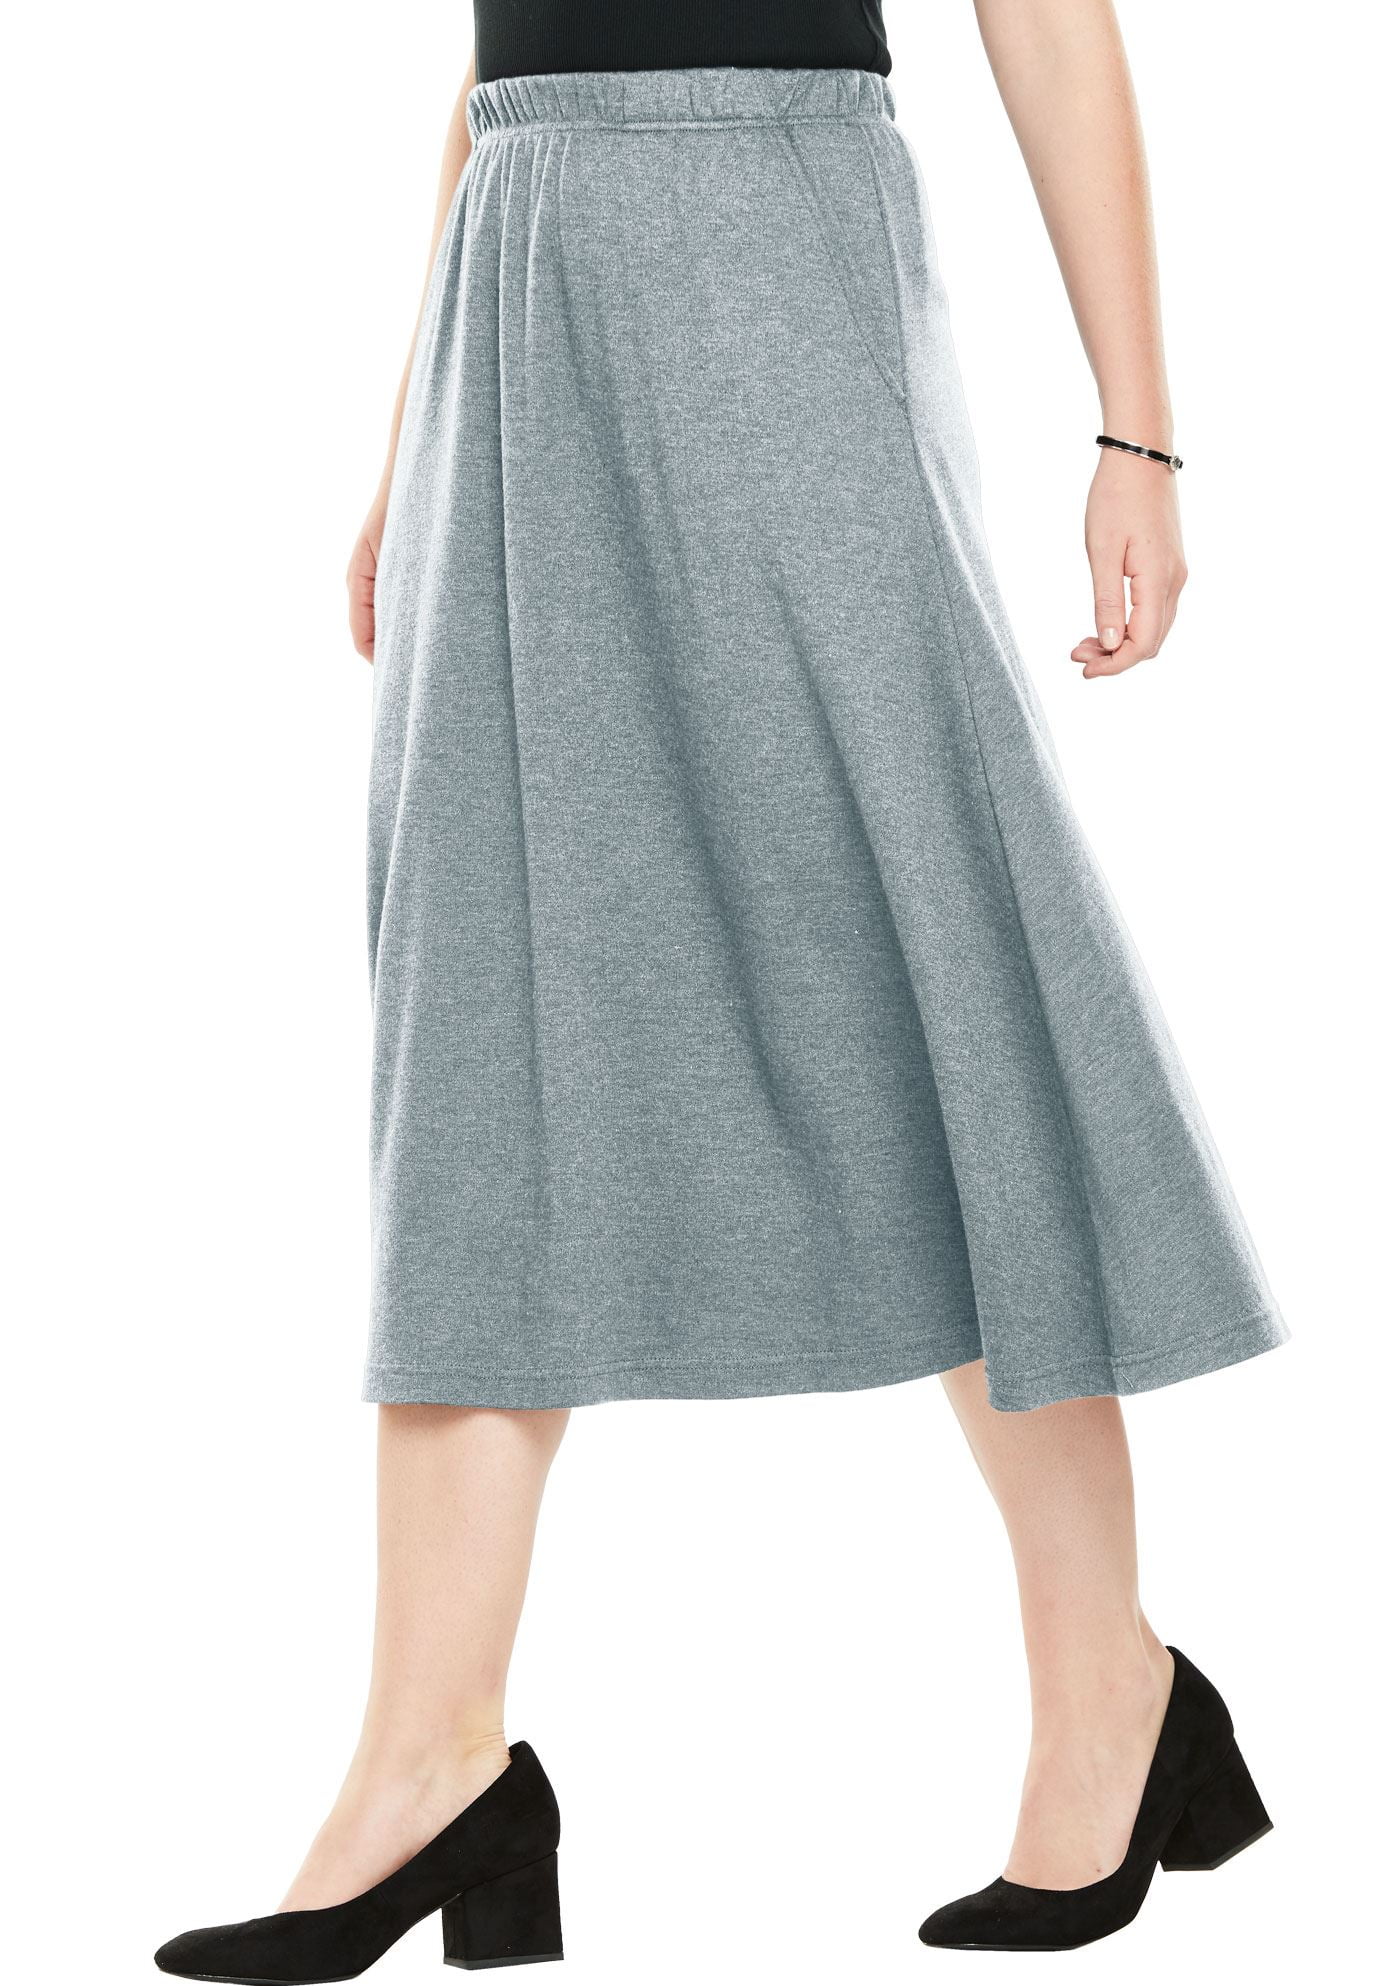 Woman Within - Woman Within Plus Size 7-day Knit A-line Skirt - Walmart.com